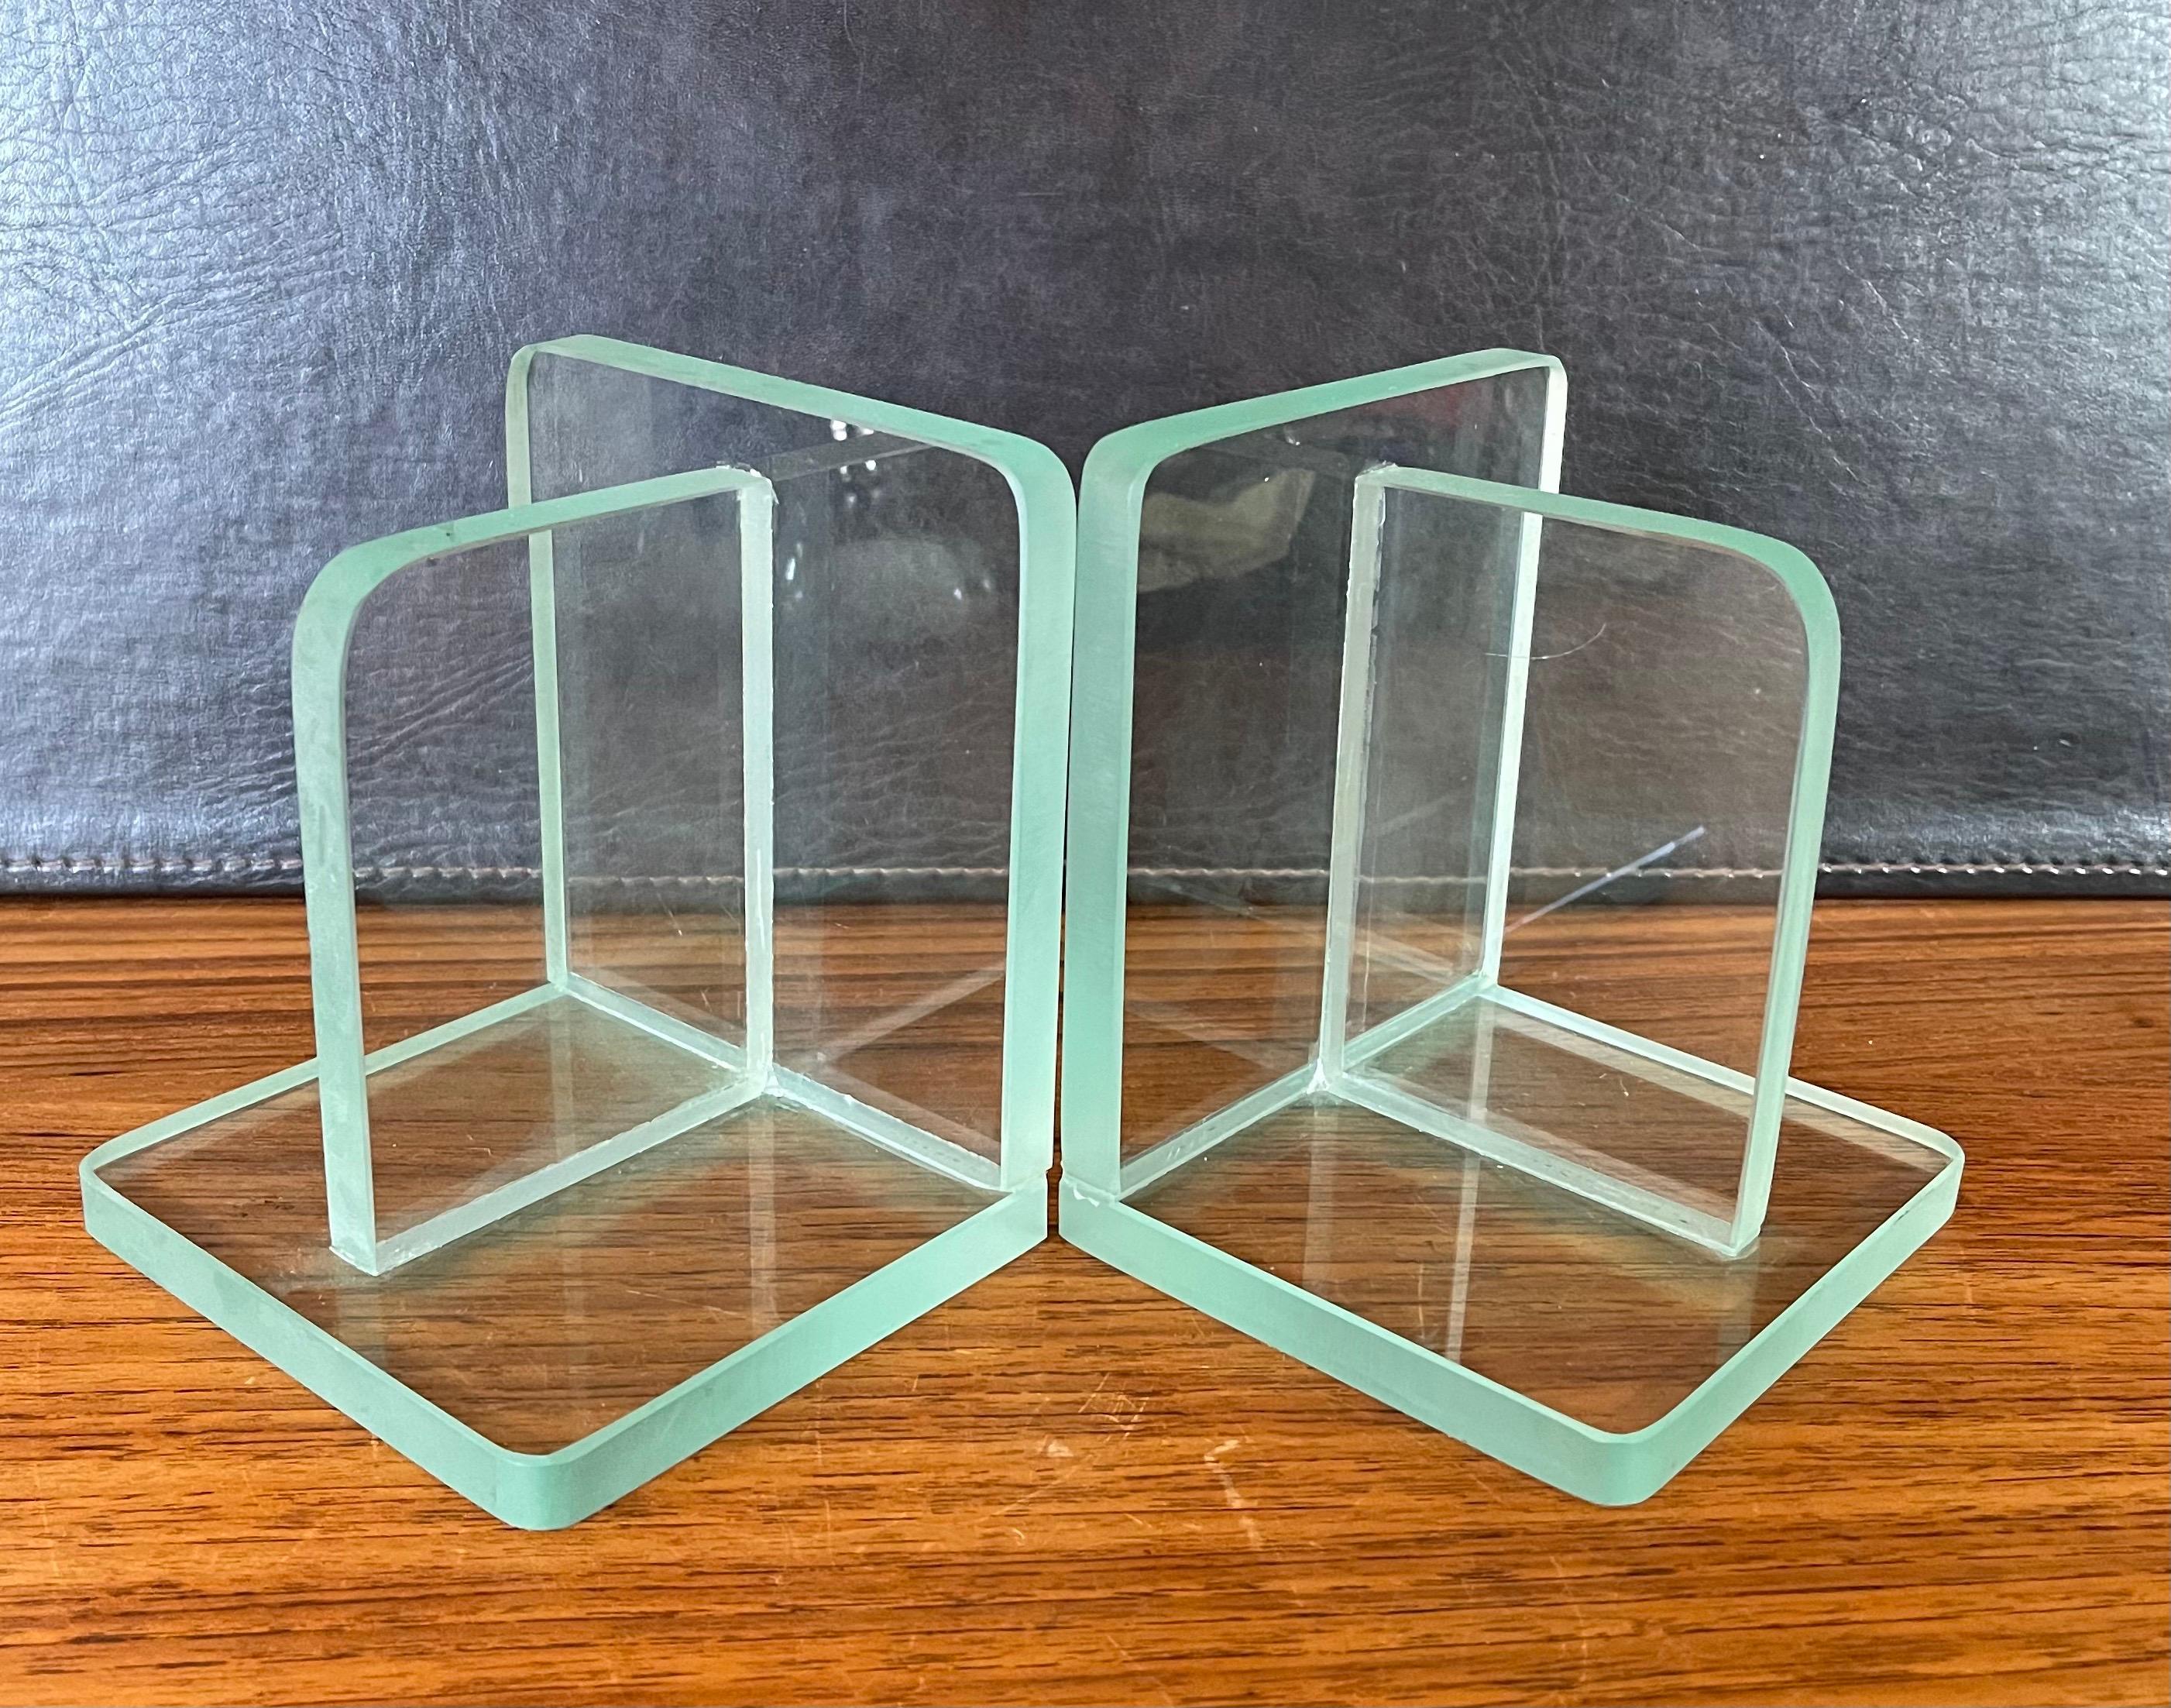 Pair of Mid-Century Modern Minimalist clear glass bookends, circa 1980s. The bookends are in very good condition and measure 8.5